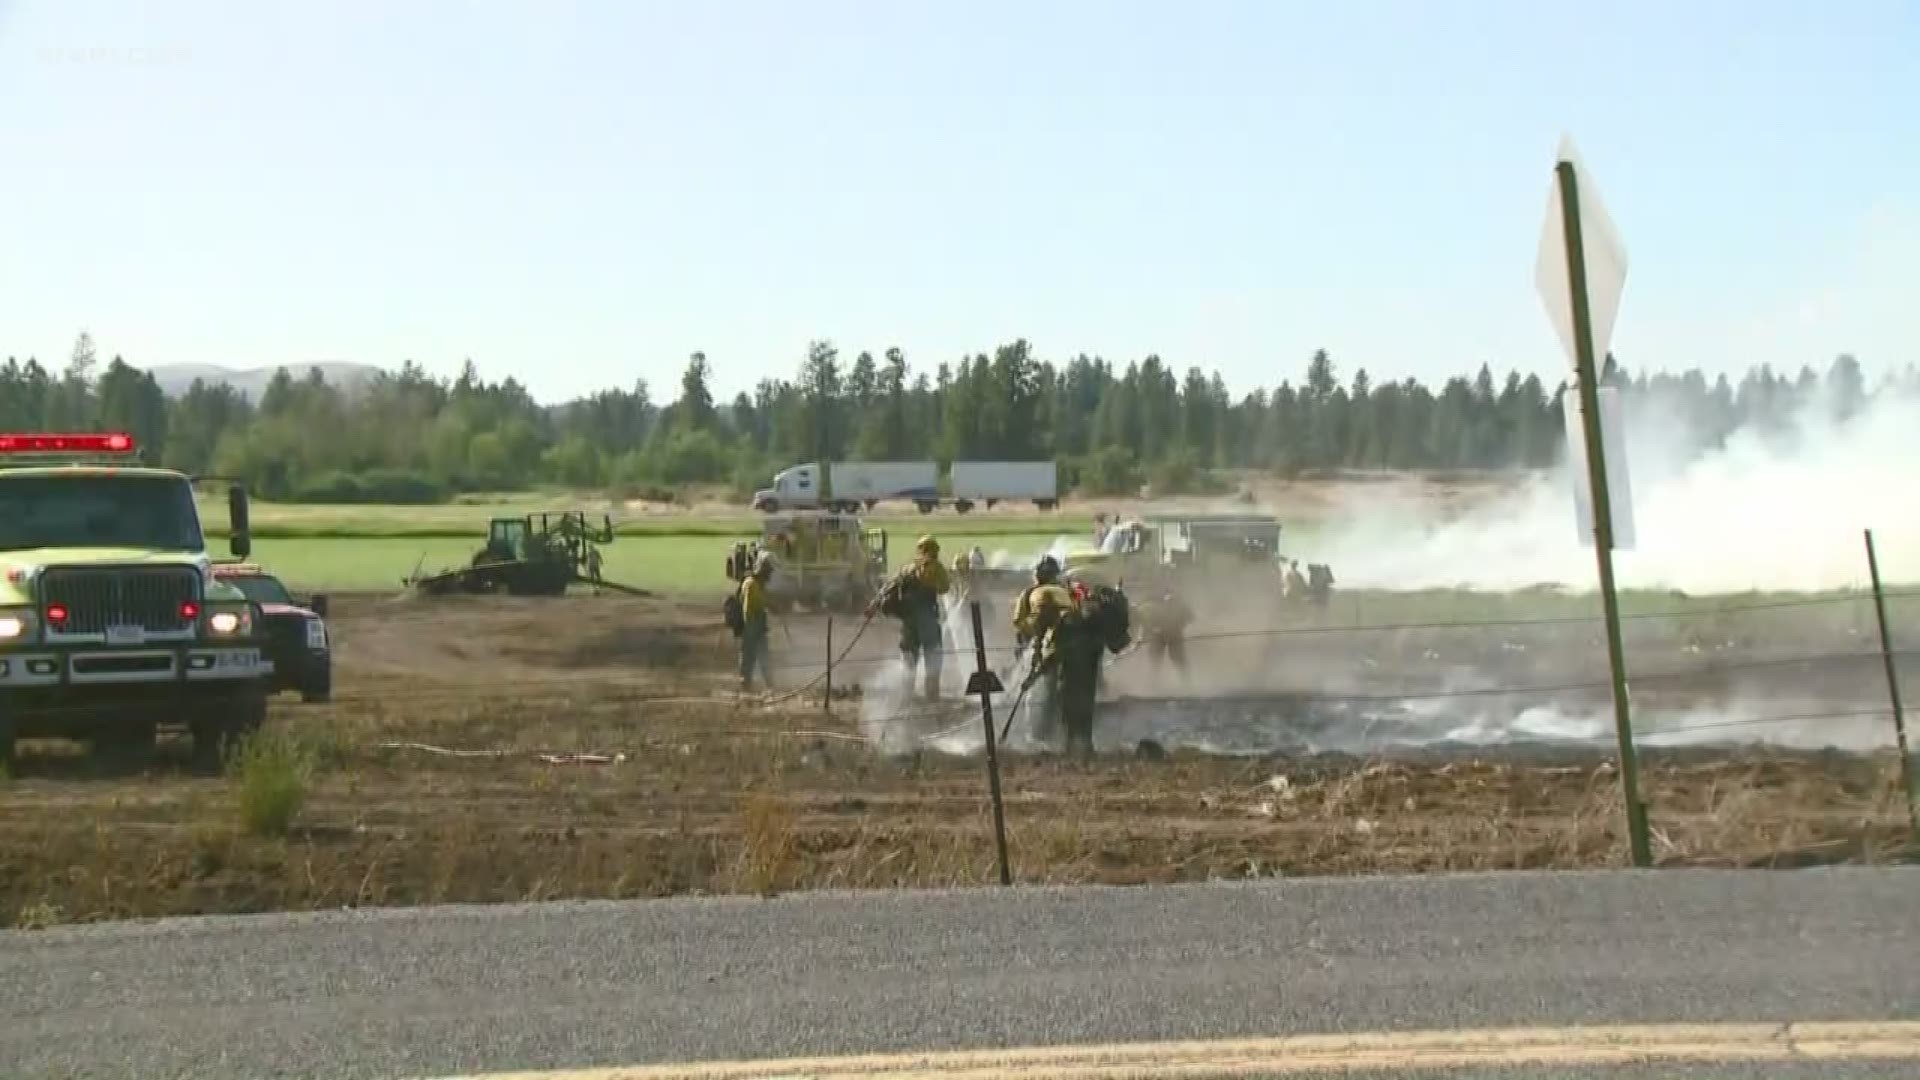 Fire crews said the fire was burning roughly half an acre. They said the fire started when a truck carrying hay caught on fire.